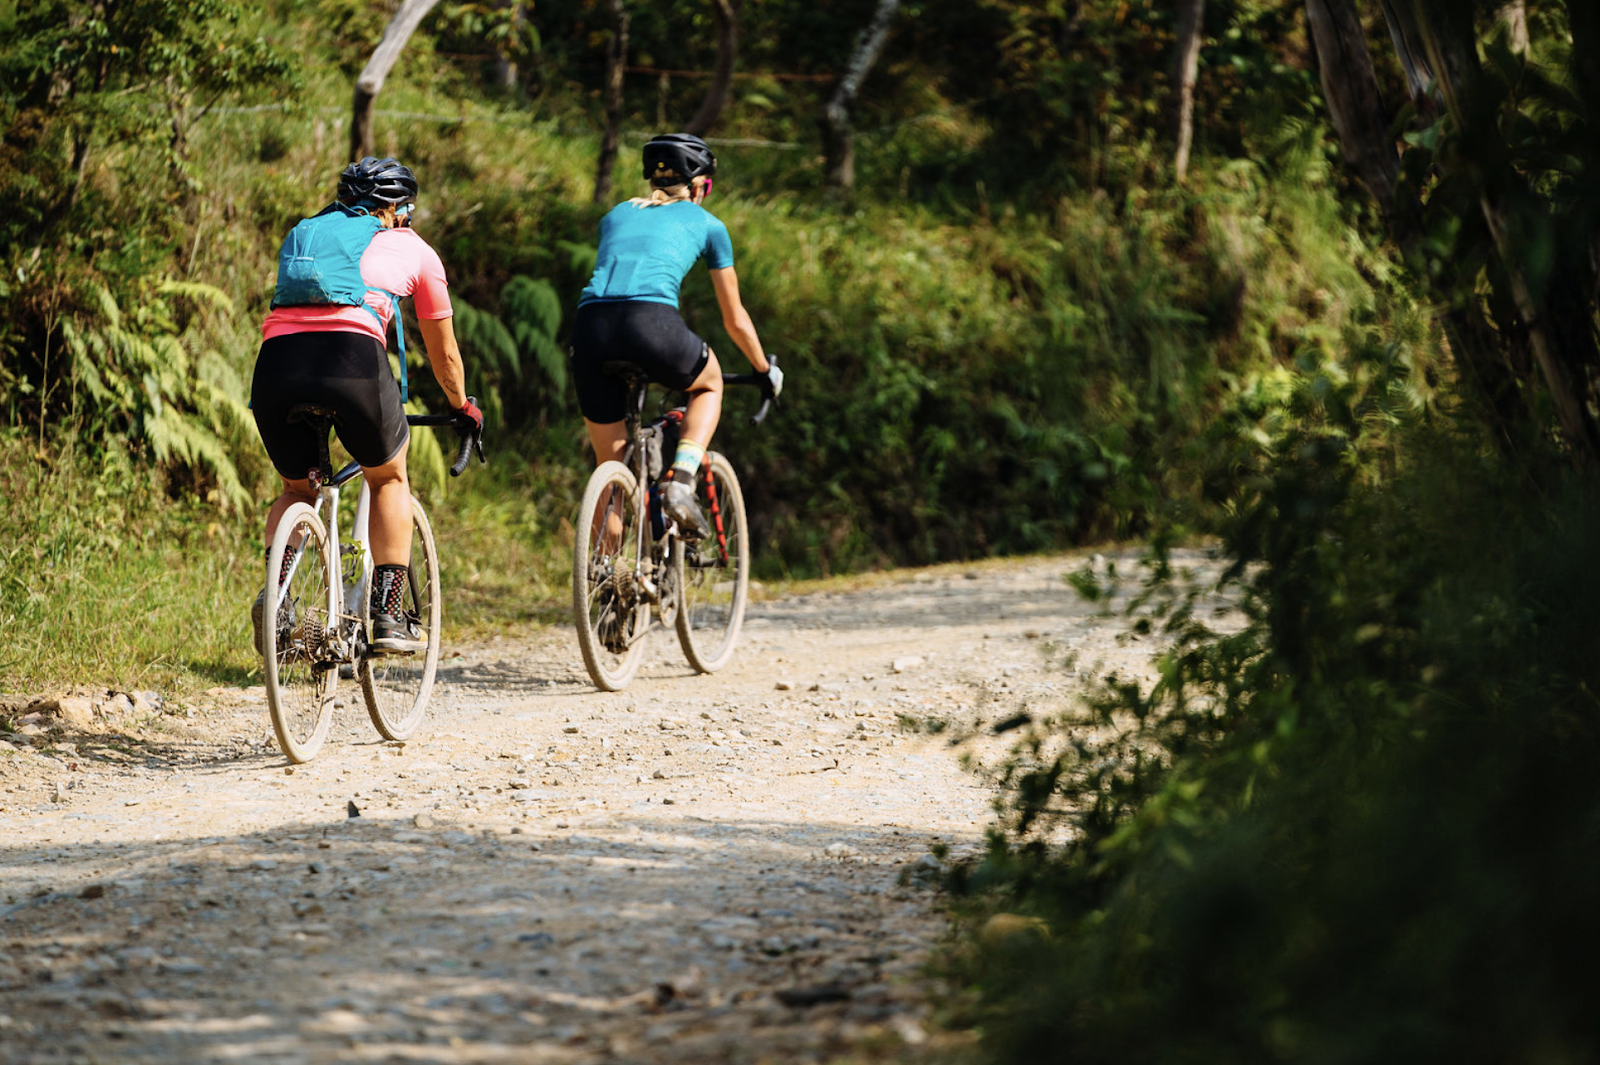 Two cyclists riding bikes on the gravel roads in Colombia